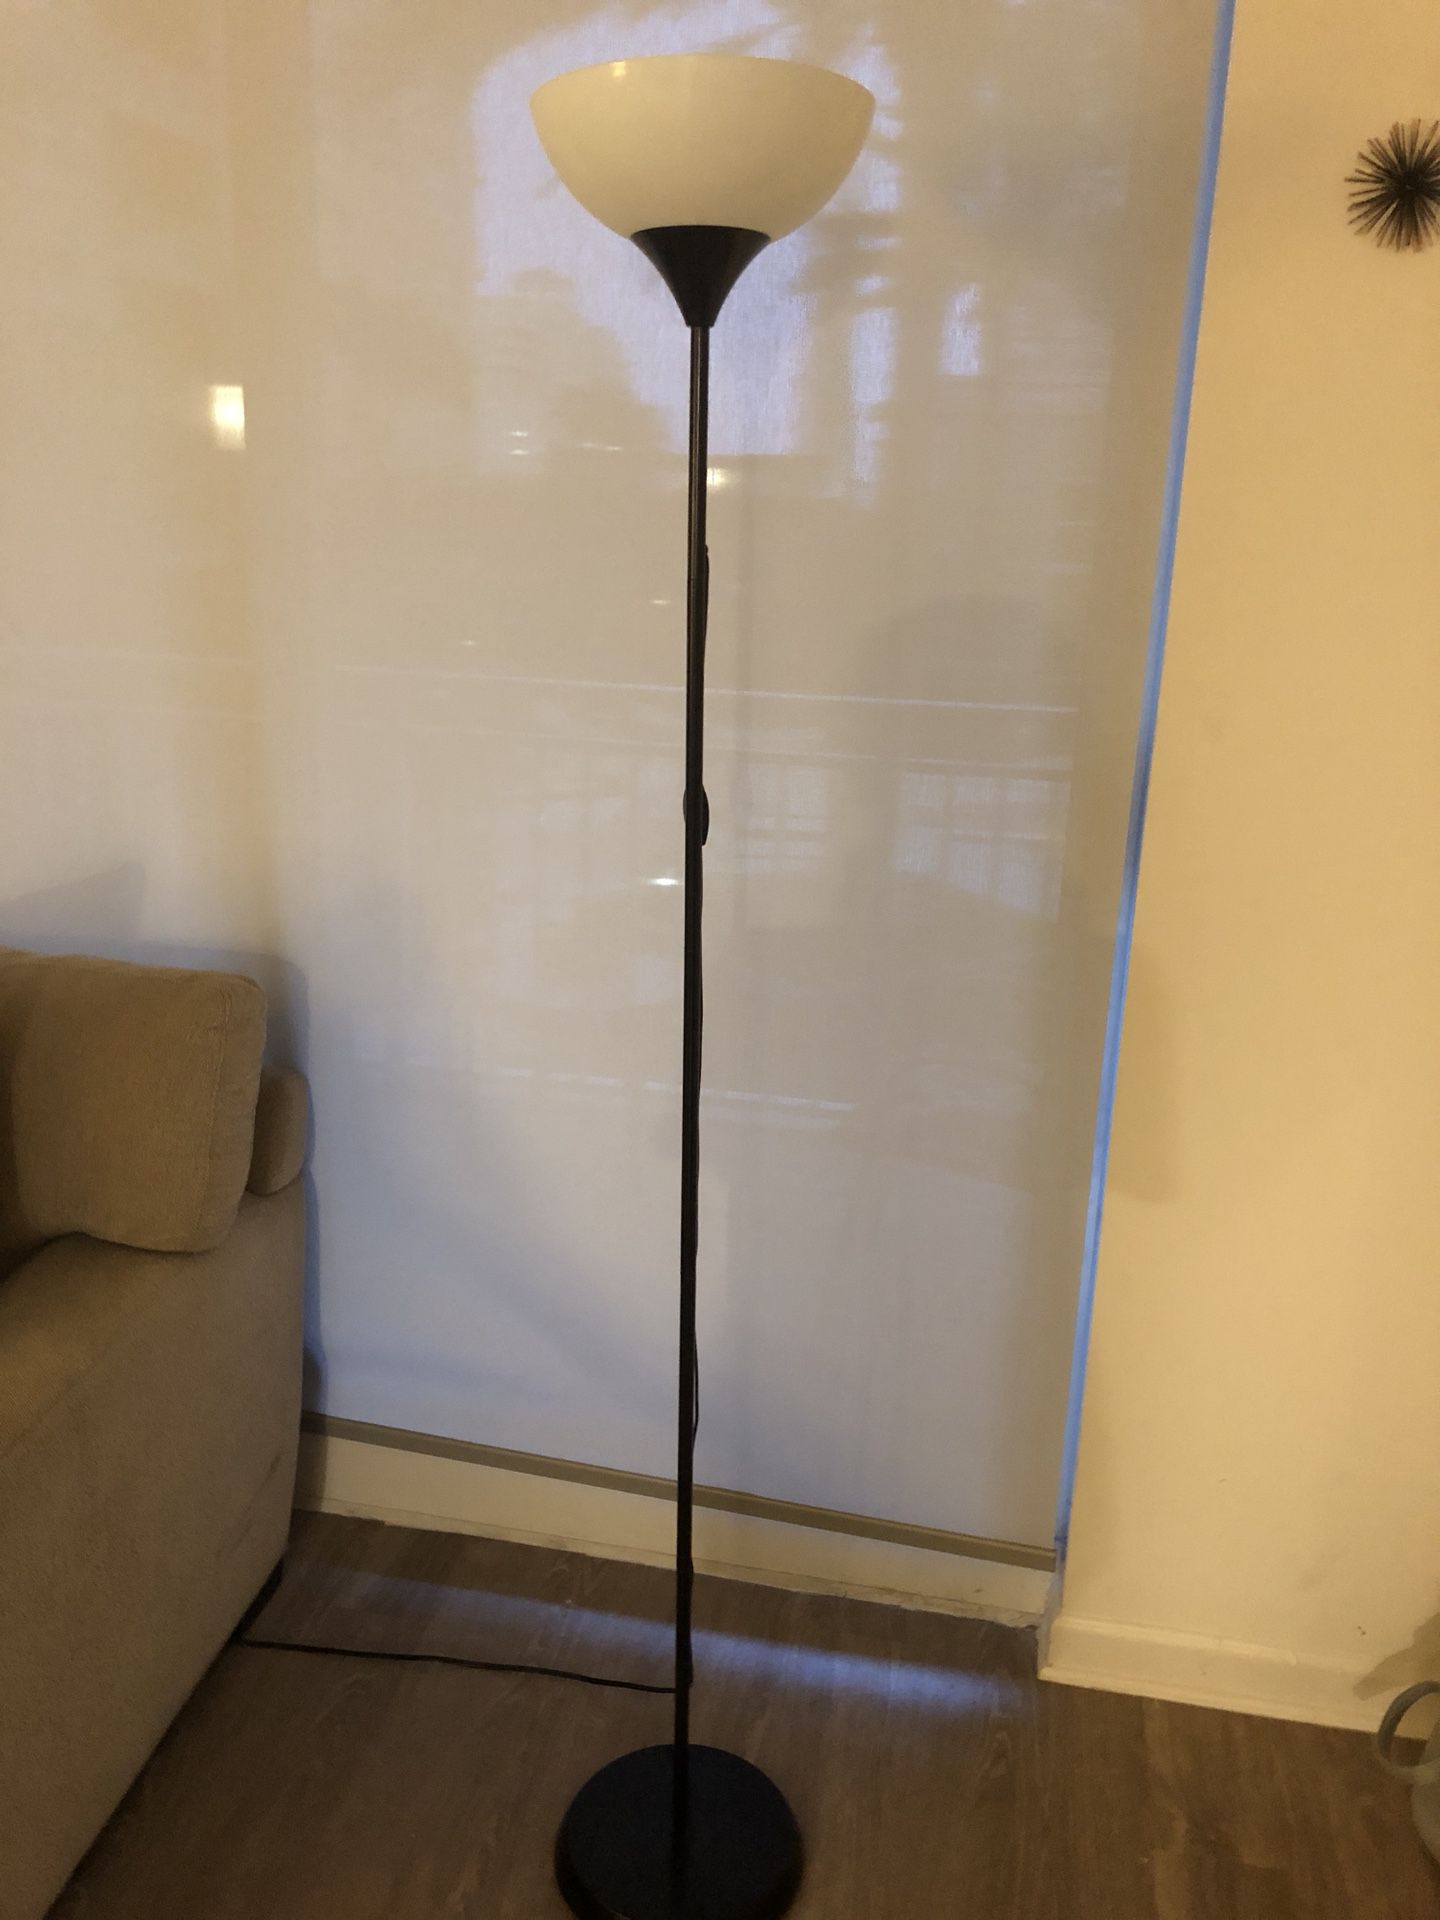 Black floor lamp. Rarely used and perfect condition